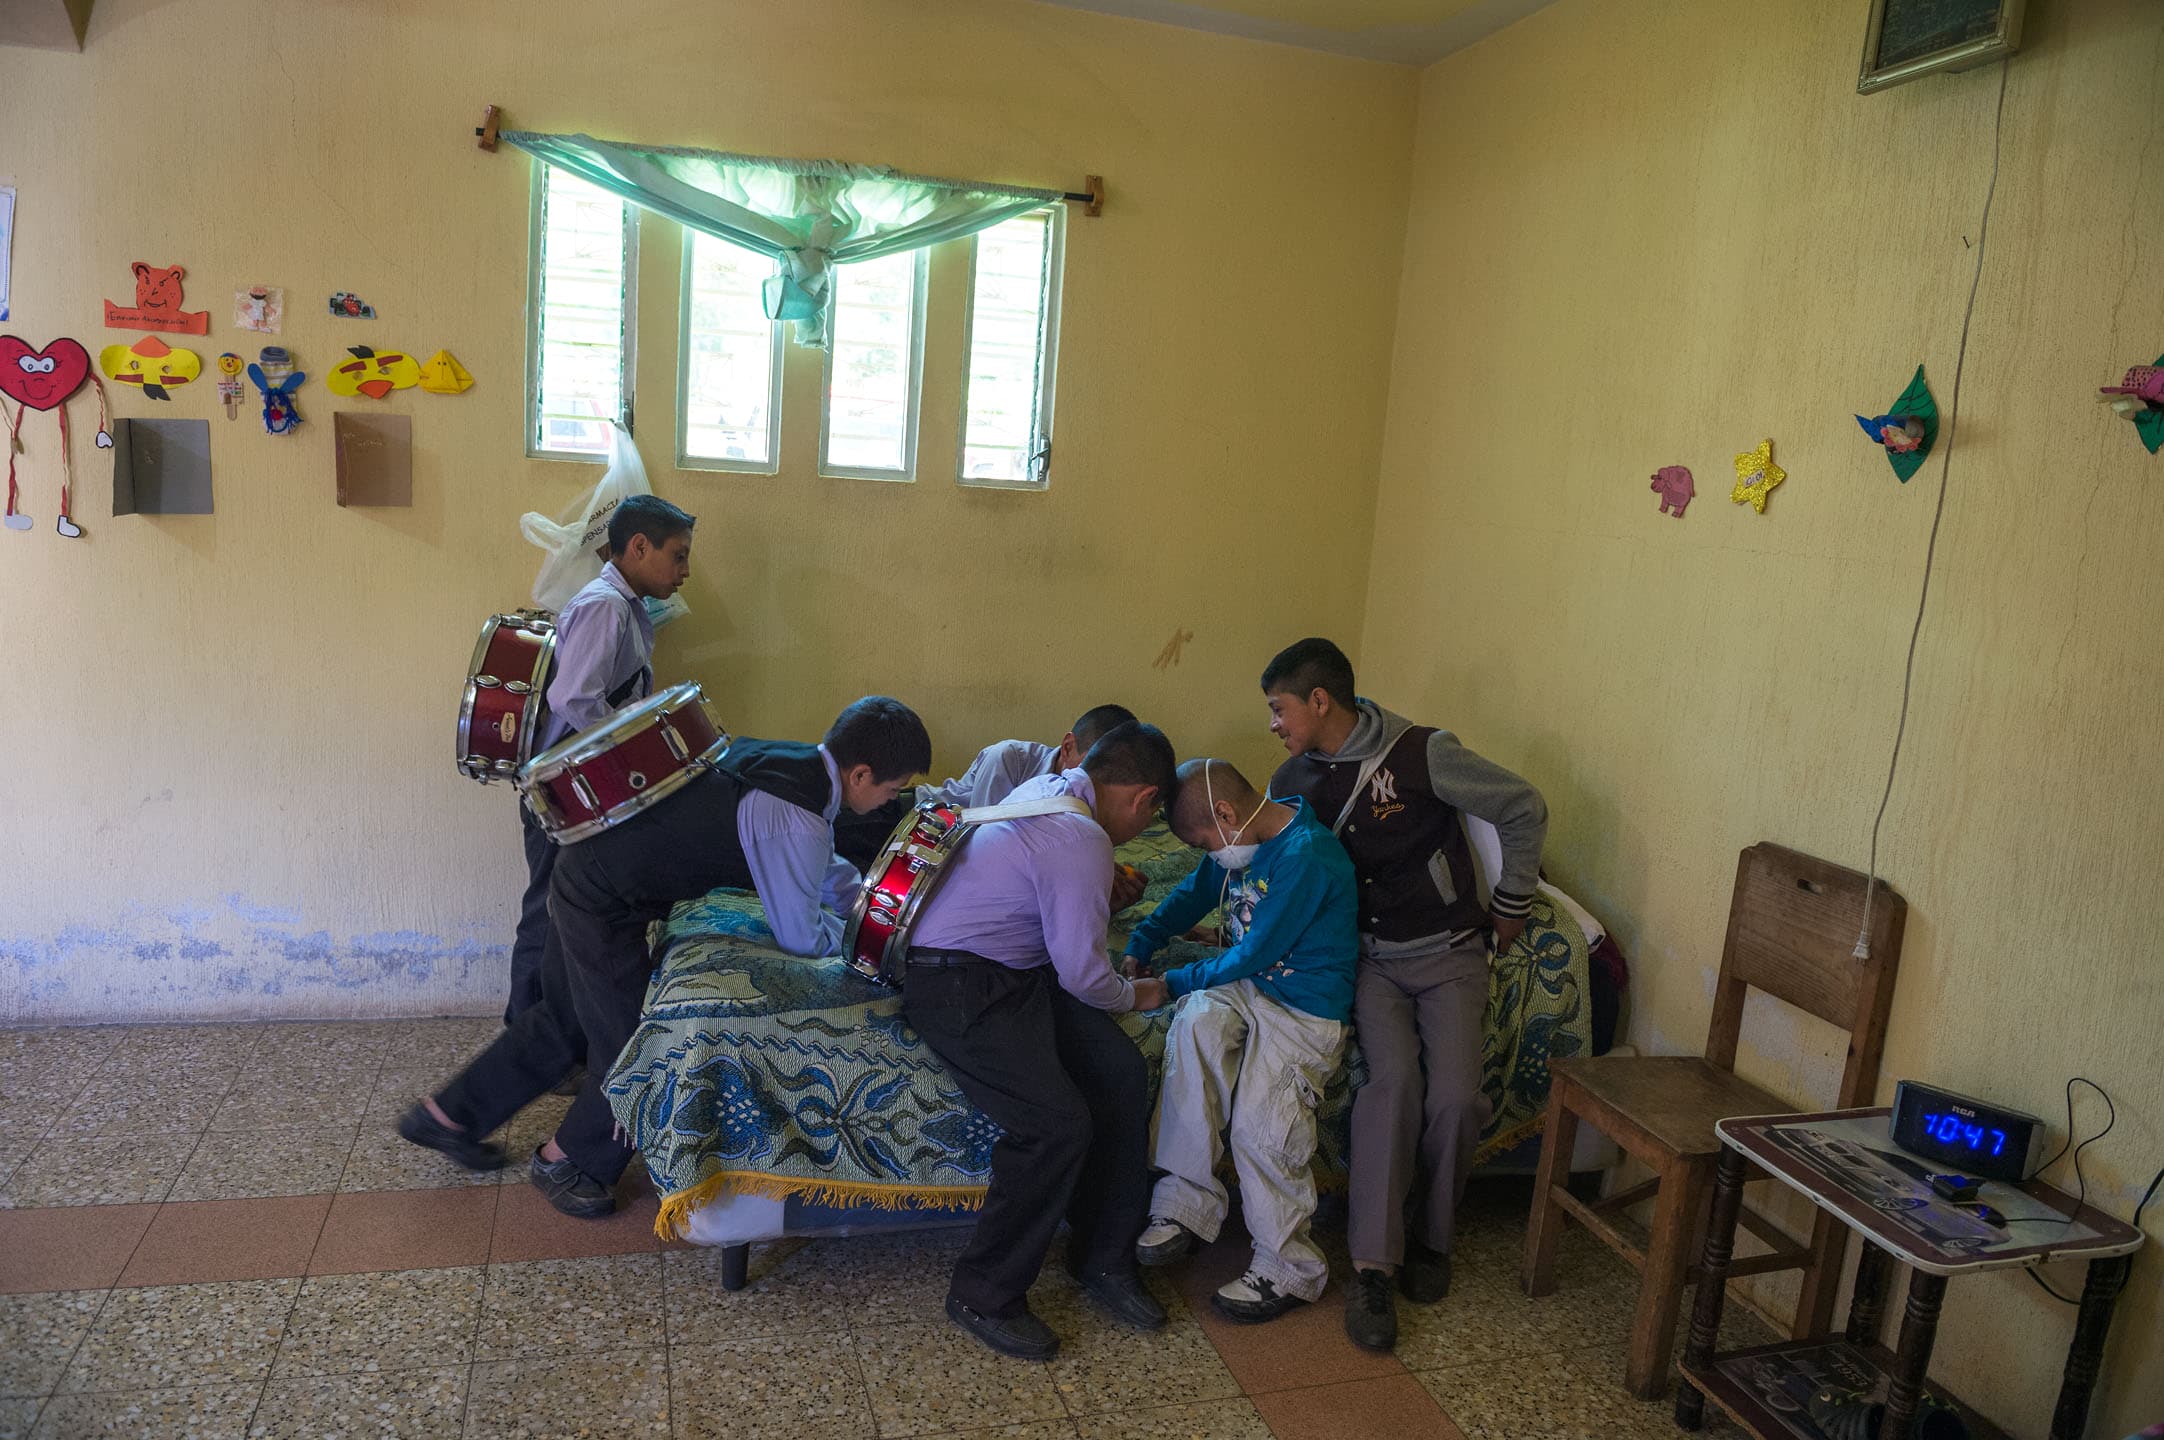 Heber Menchu Tamayac, 8, sits on the bed inside his family’s shared bedroom in San Cristobal, Totonicapan, Guatemala, while his friends console him.